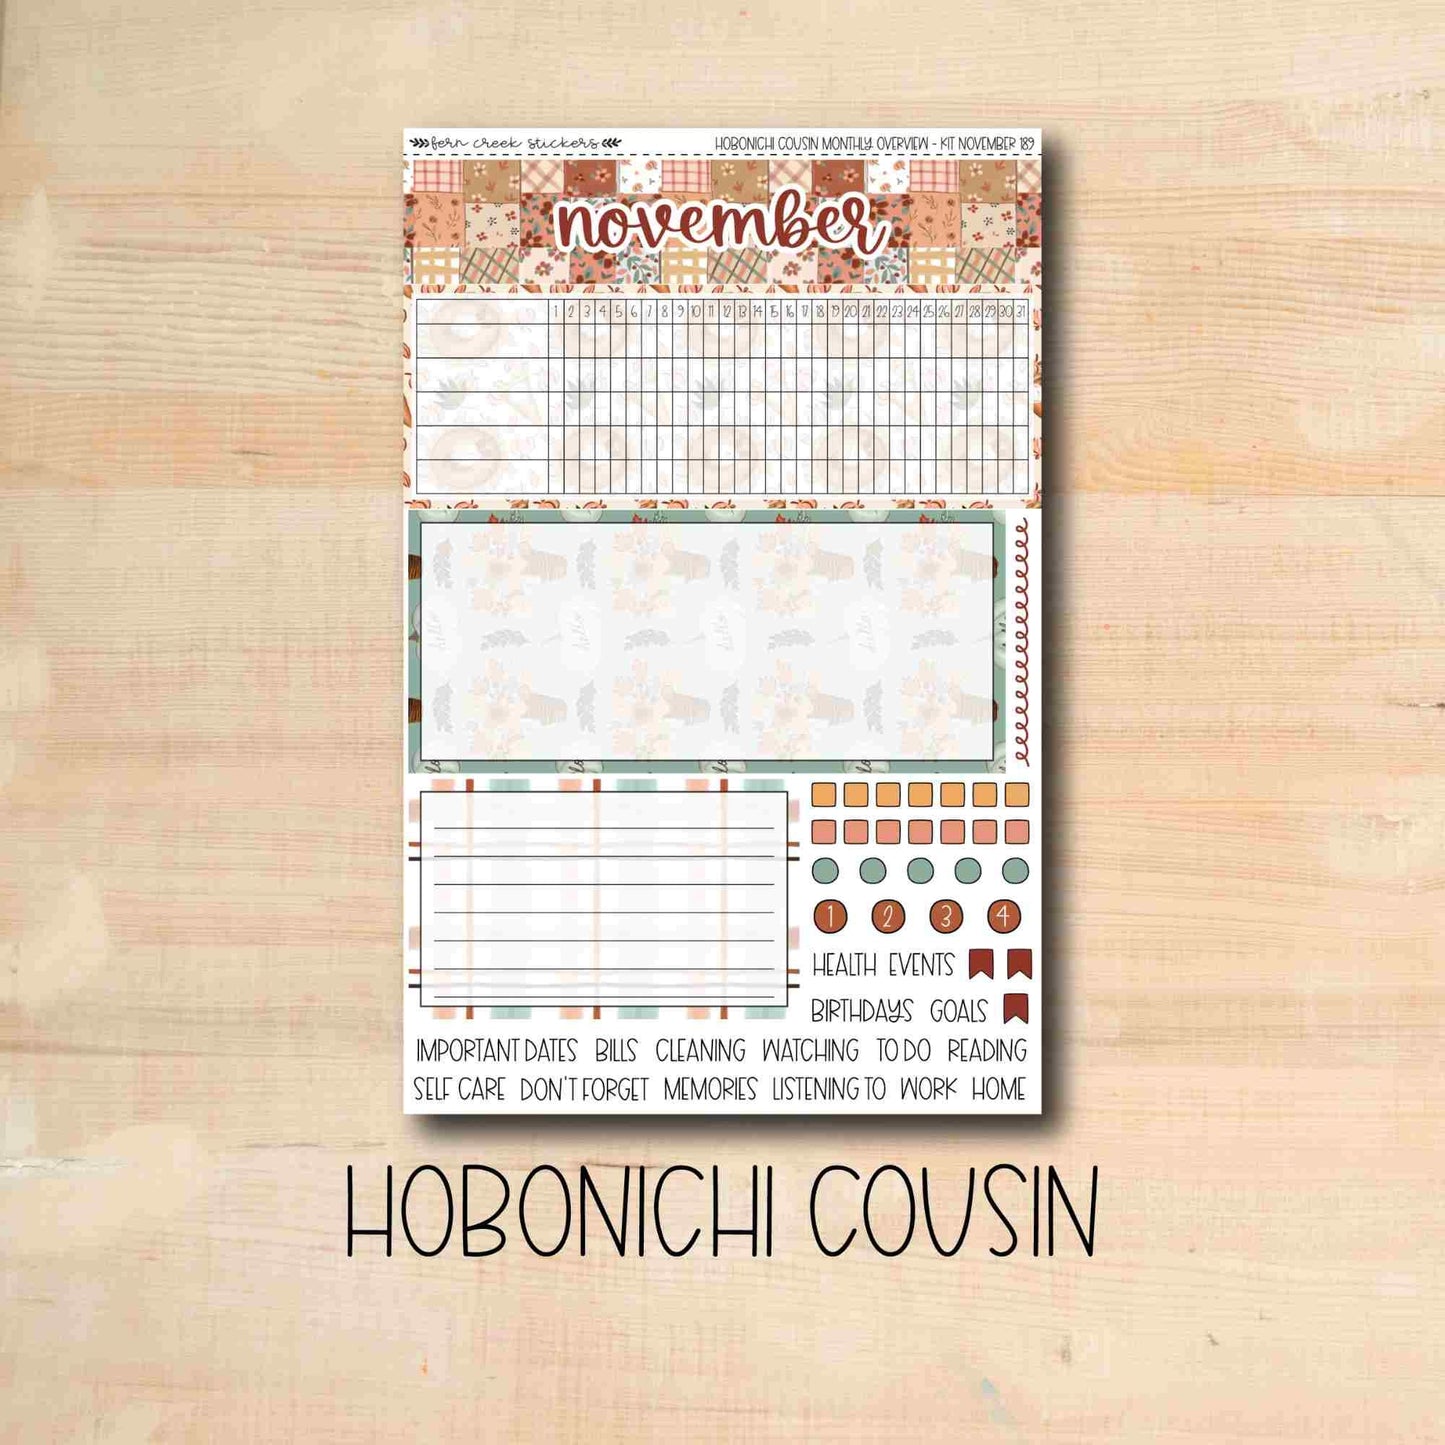 HCMO-189 || GATHER November Hobonichi Cousin monthly overview